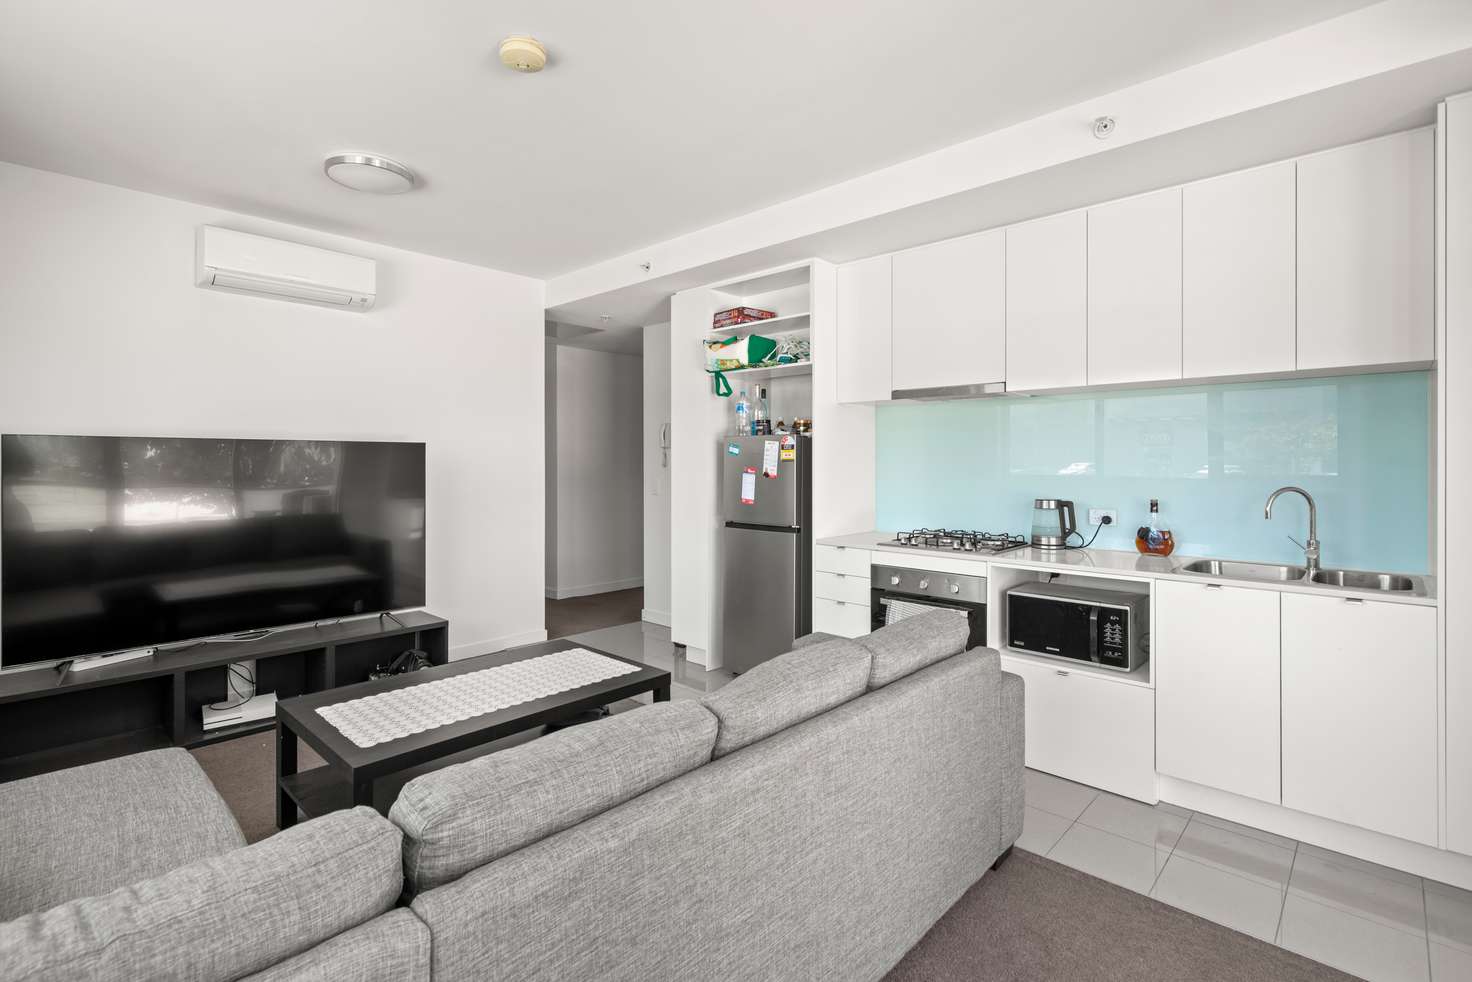 Main view of Homely apartment listing, 102/17 Malata Crescent, Success WA 6164